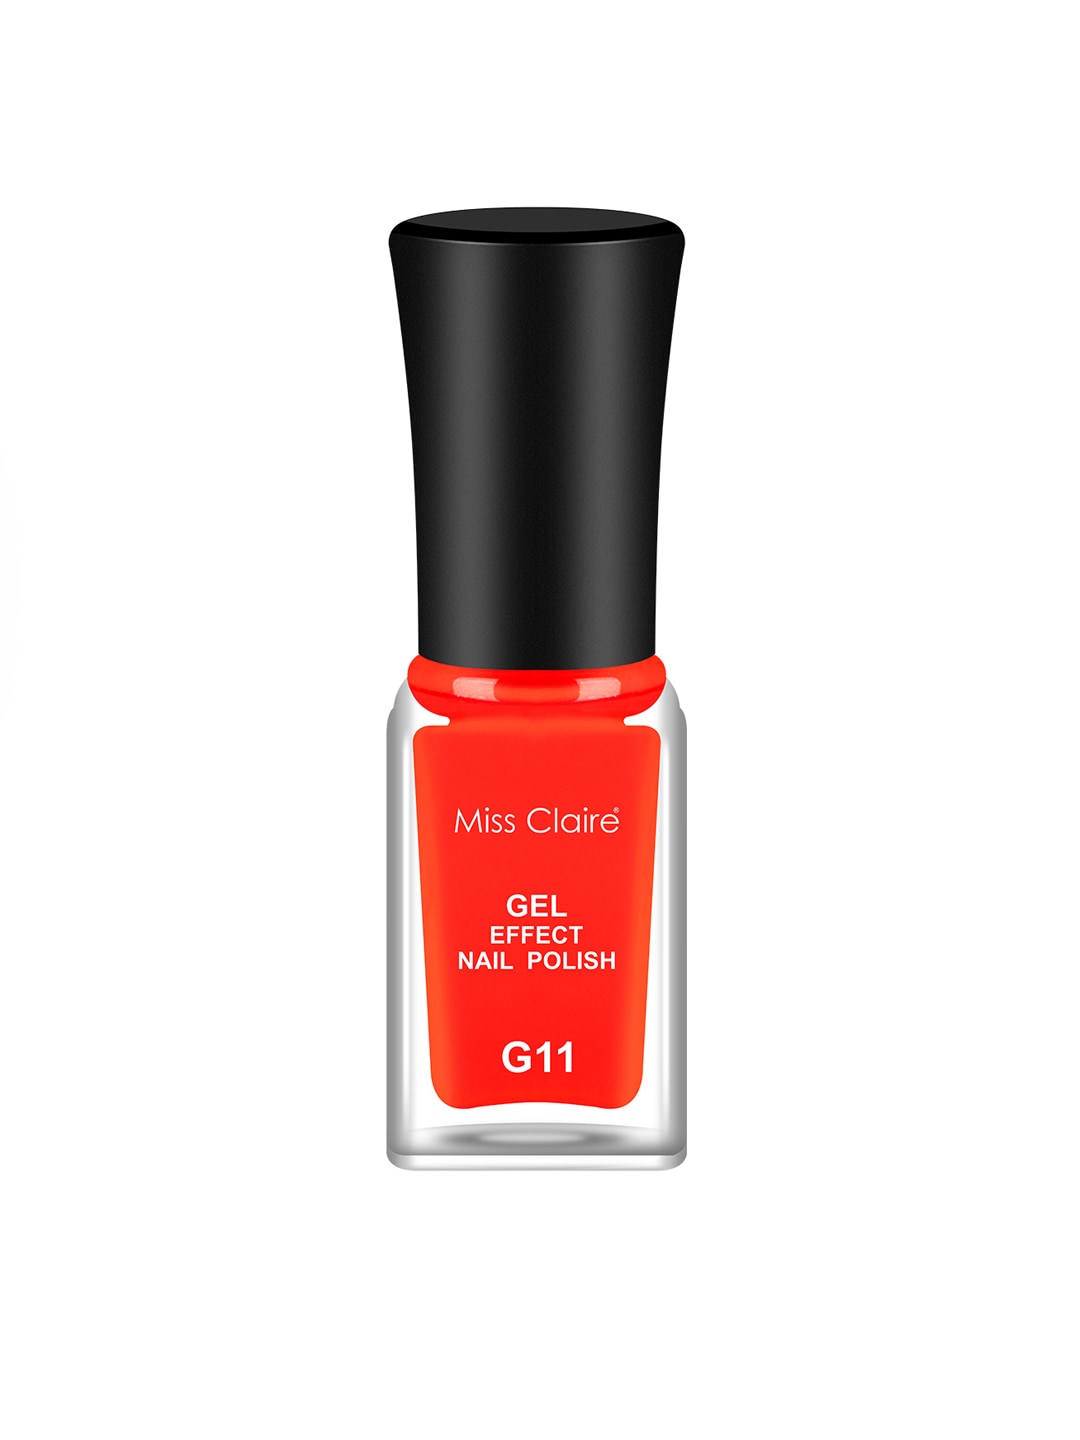 Miss Claire Gel Effect Nail Polish 5 ml Starts from Rs. 31